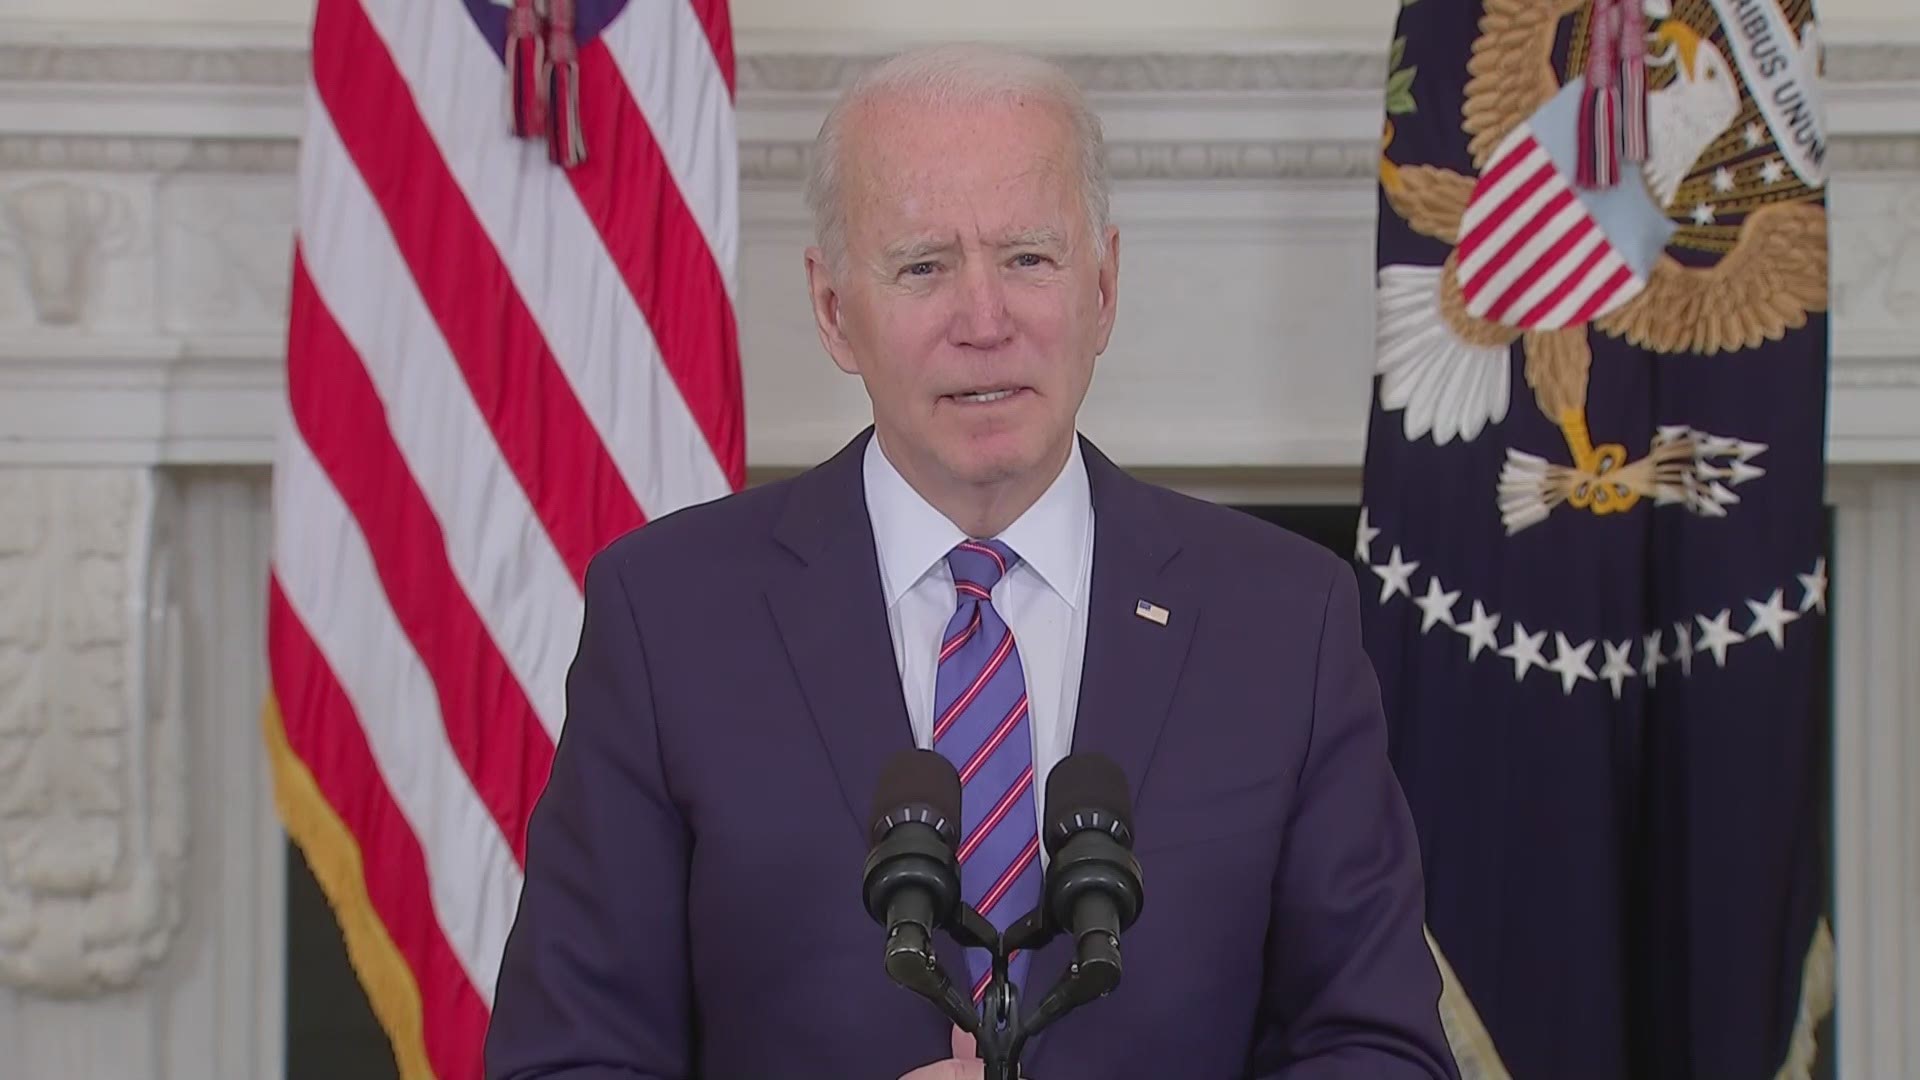 Biden said the March jobs report is good news, but showed there's still a 'long way to go' on economic recovery from the COVID-19 pandemic.